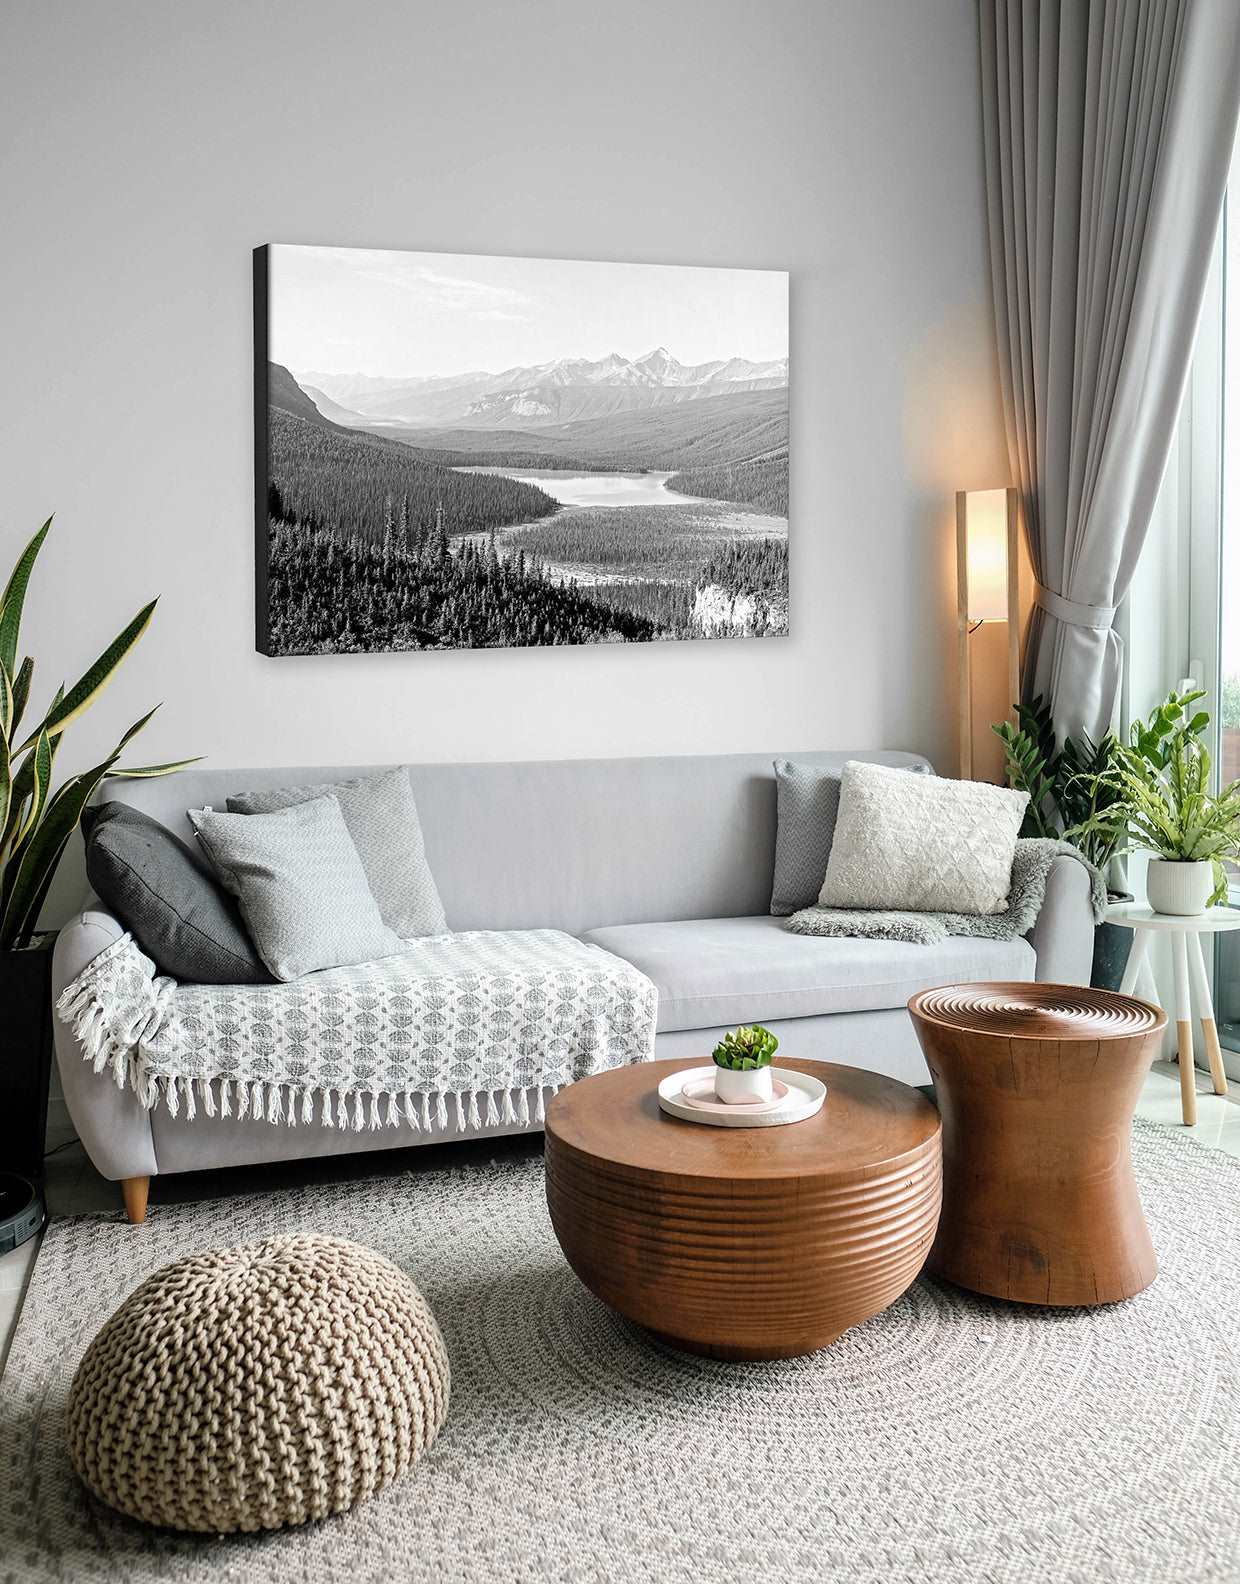 A neutral themed living room with a canvas print of a vintage landscape photograph hanging above the couch